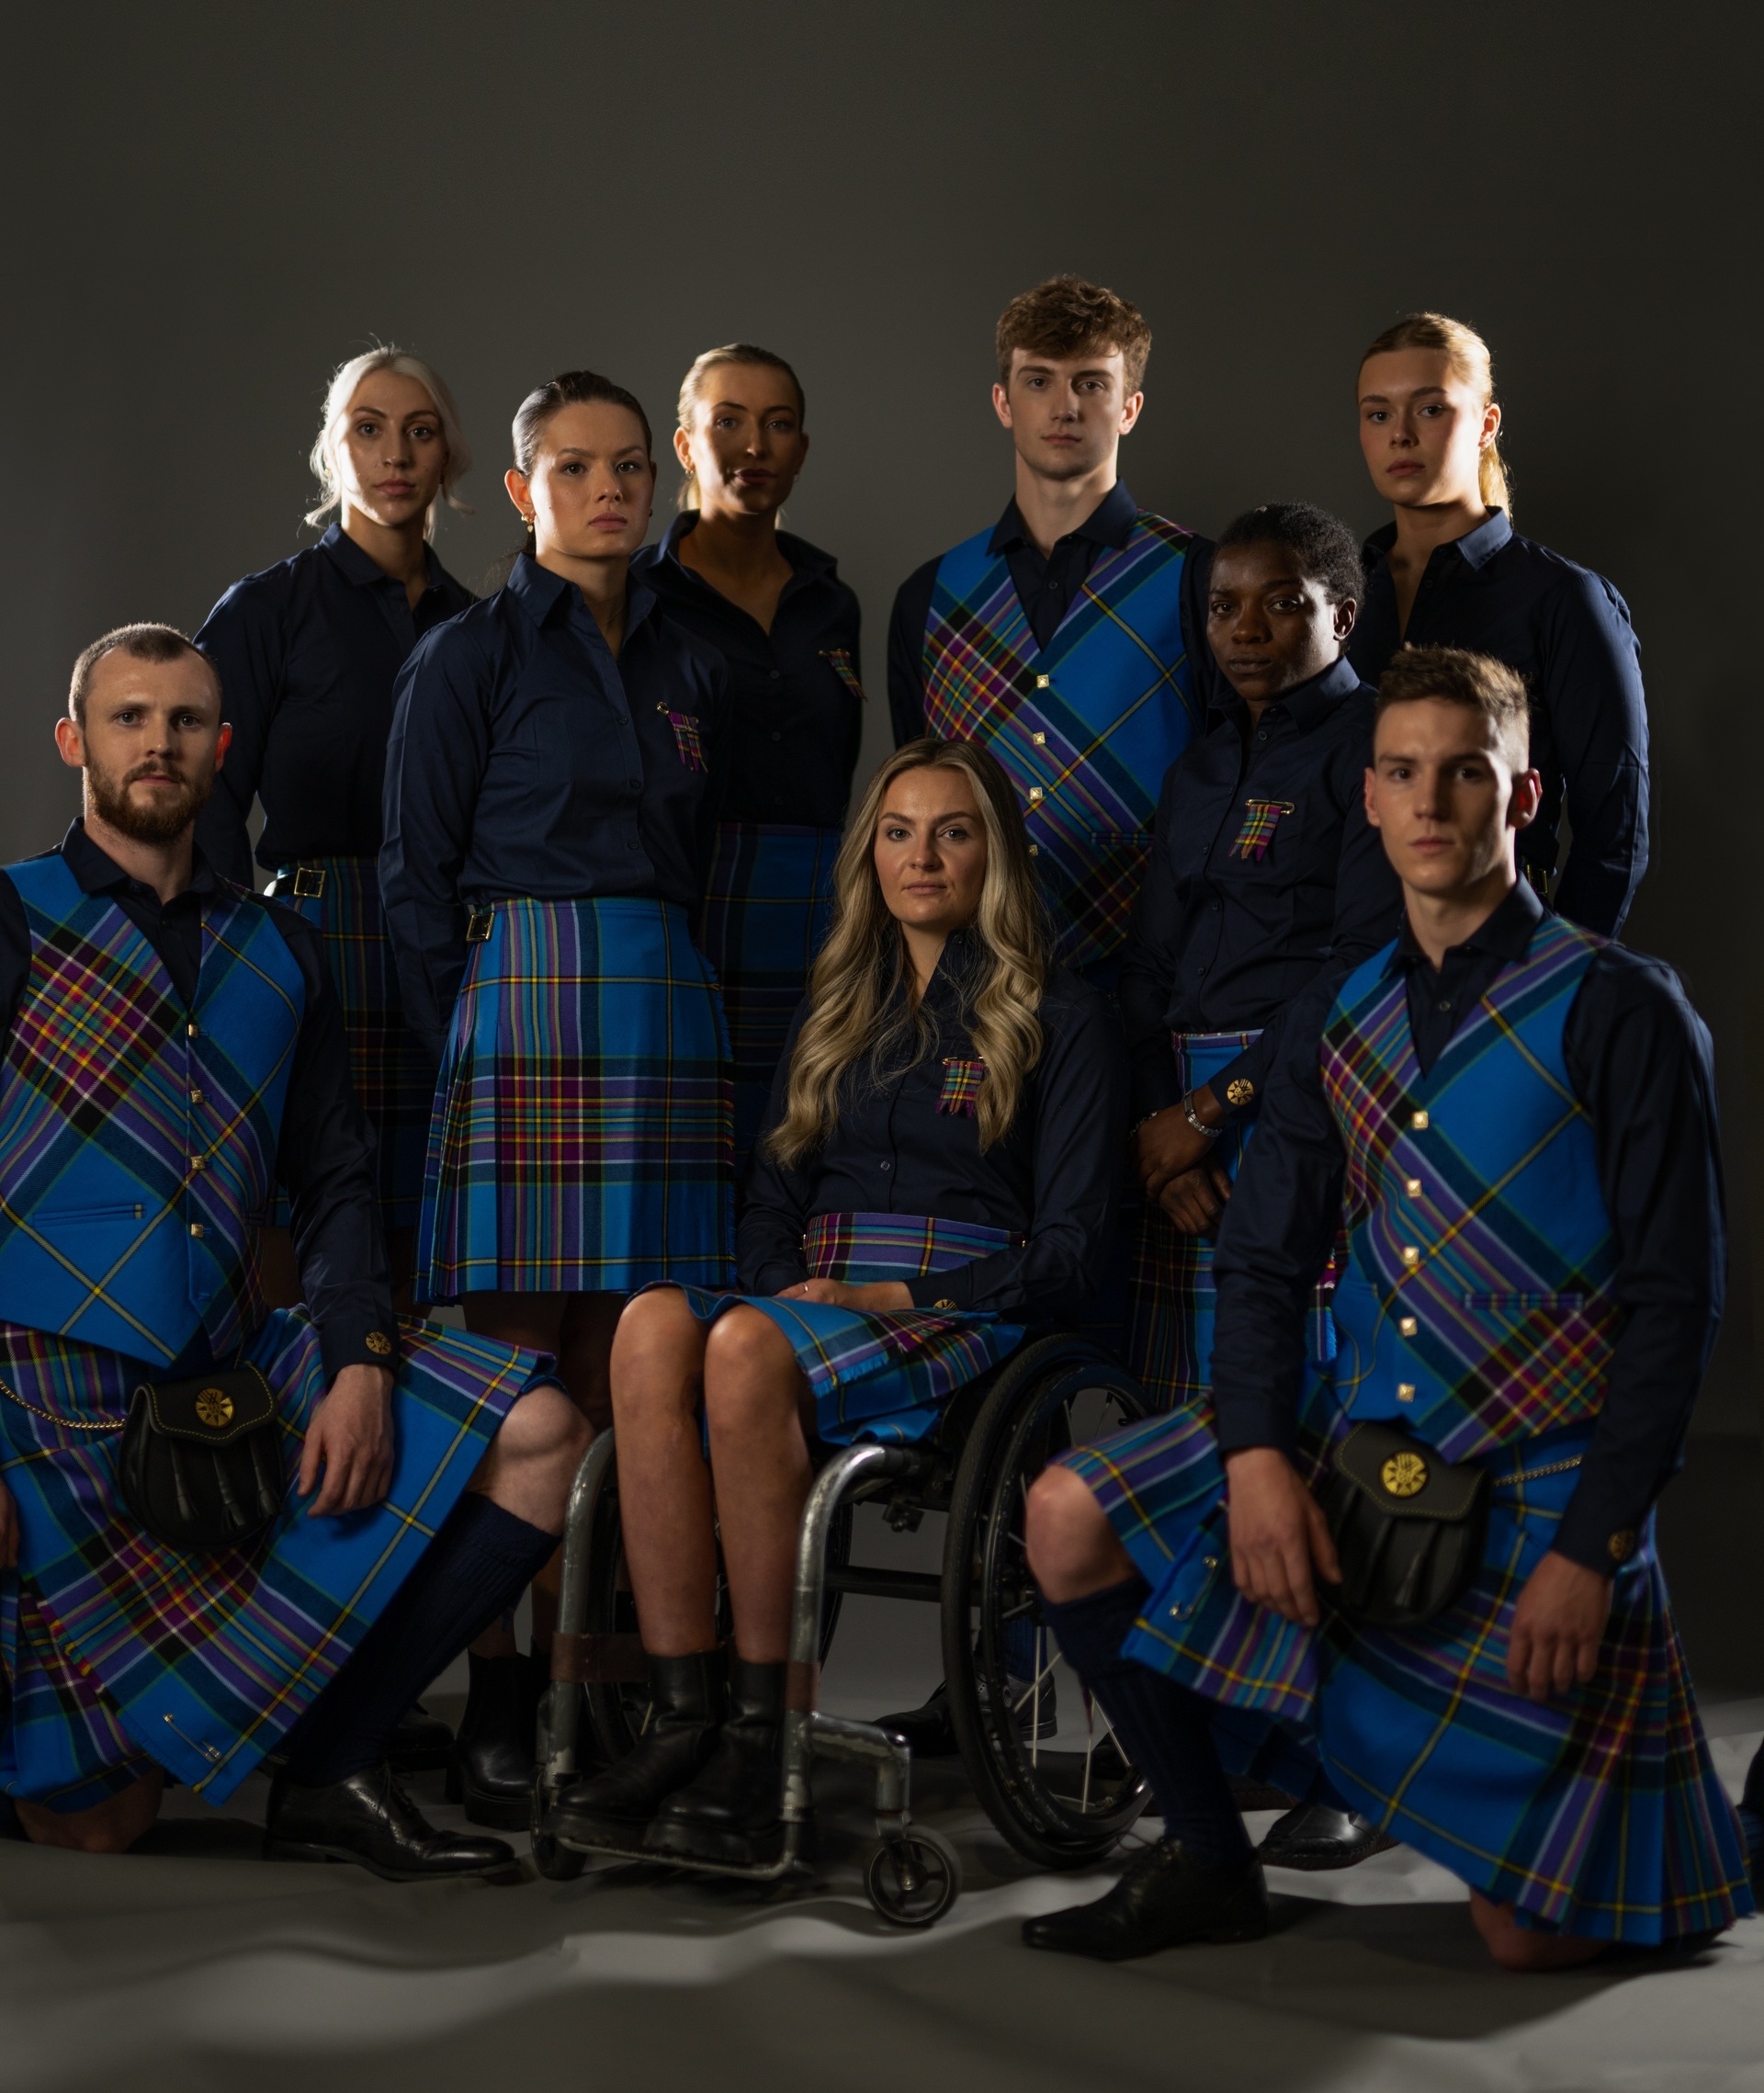 Scotland will walk out in their new uniform at the opening ceremony.